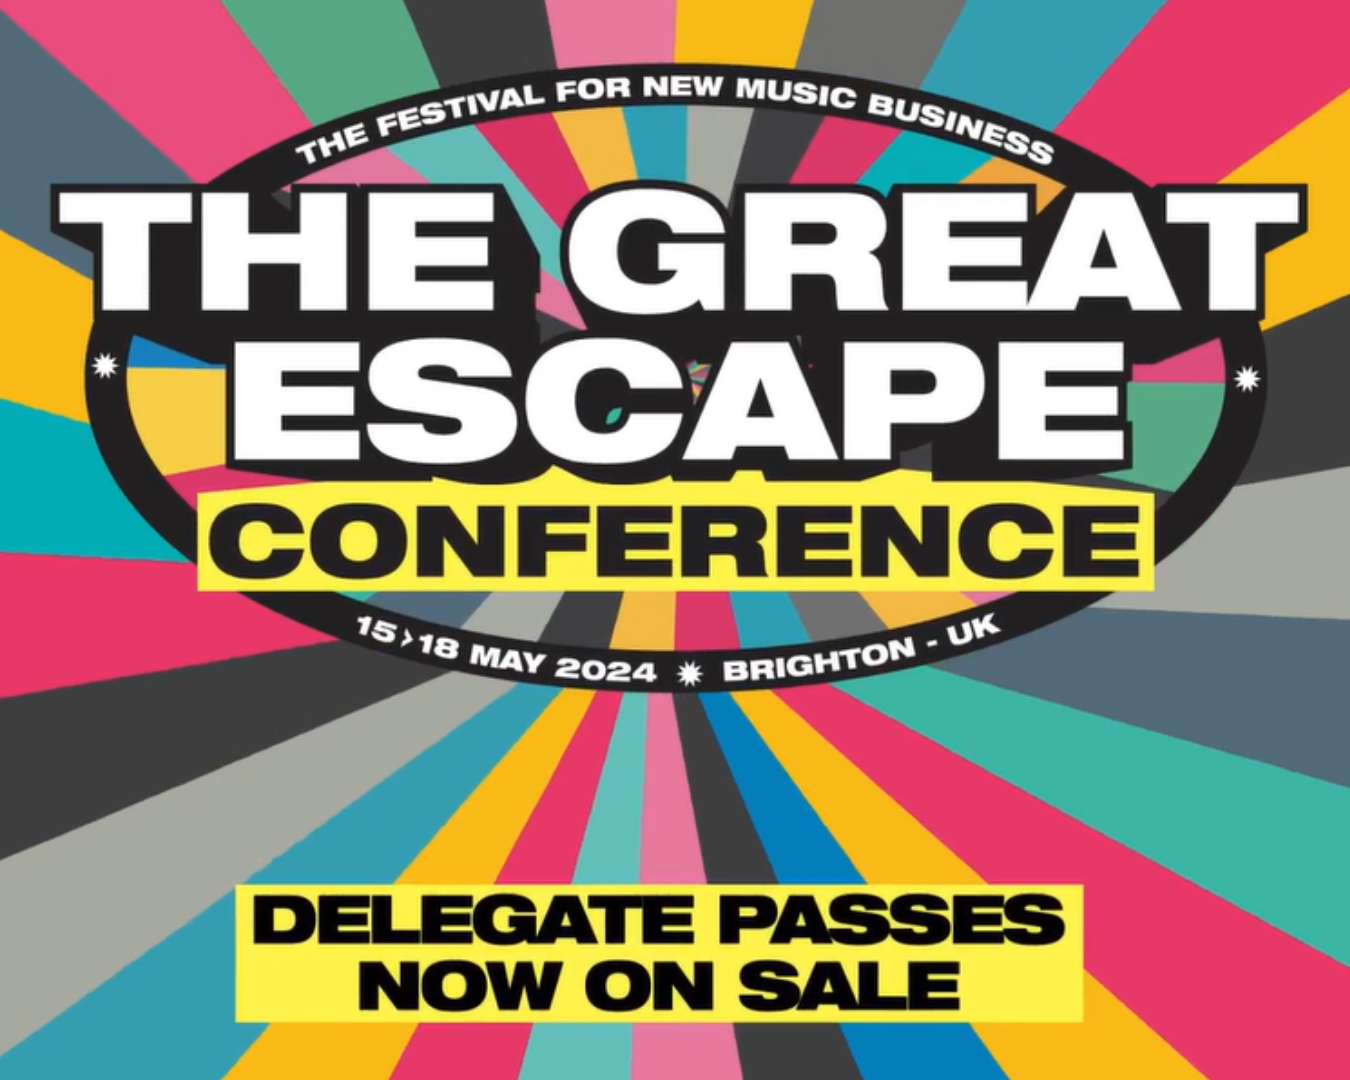 The Great Escape Conference